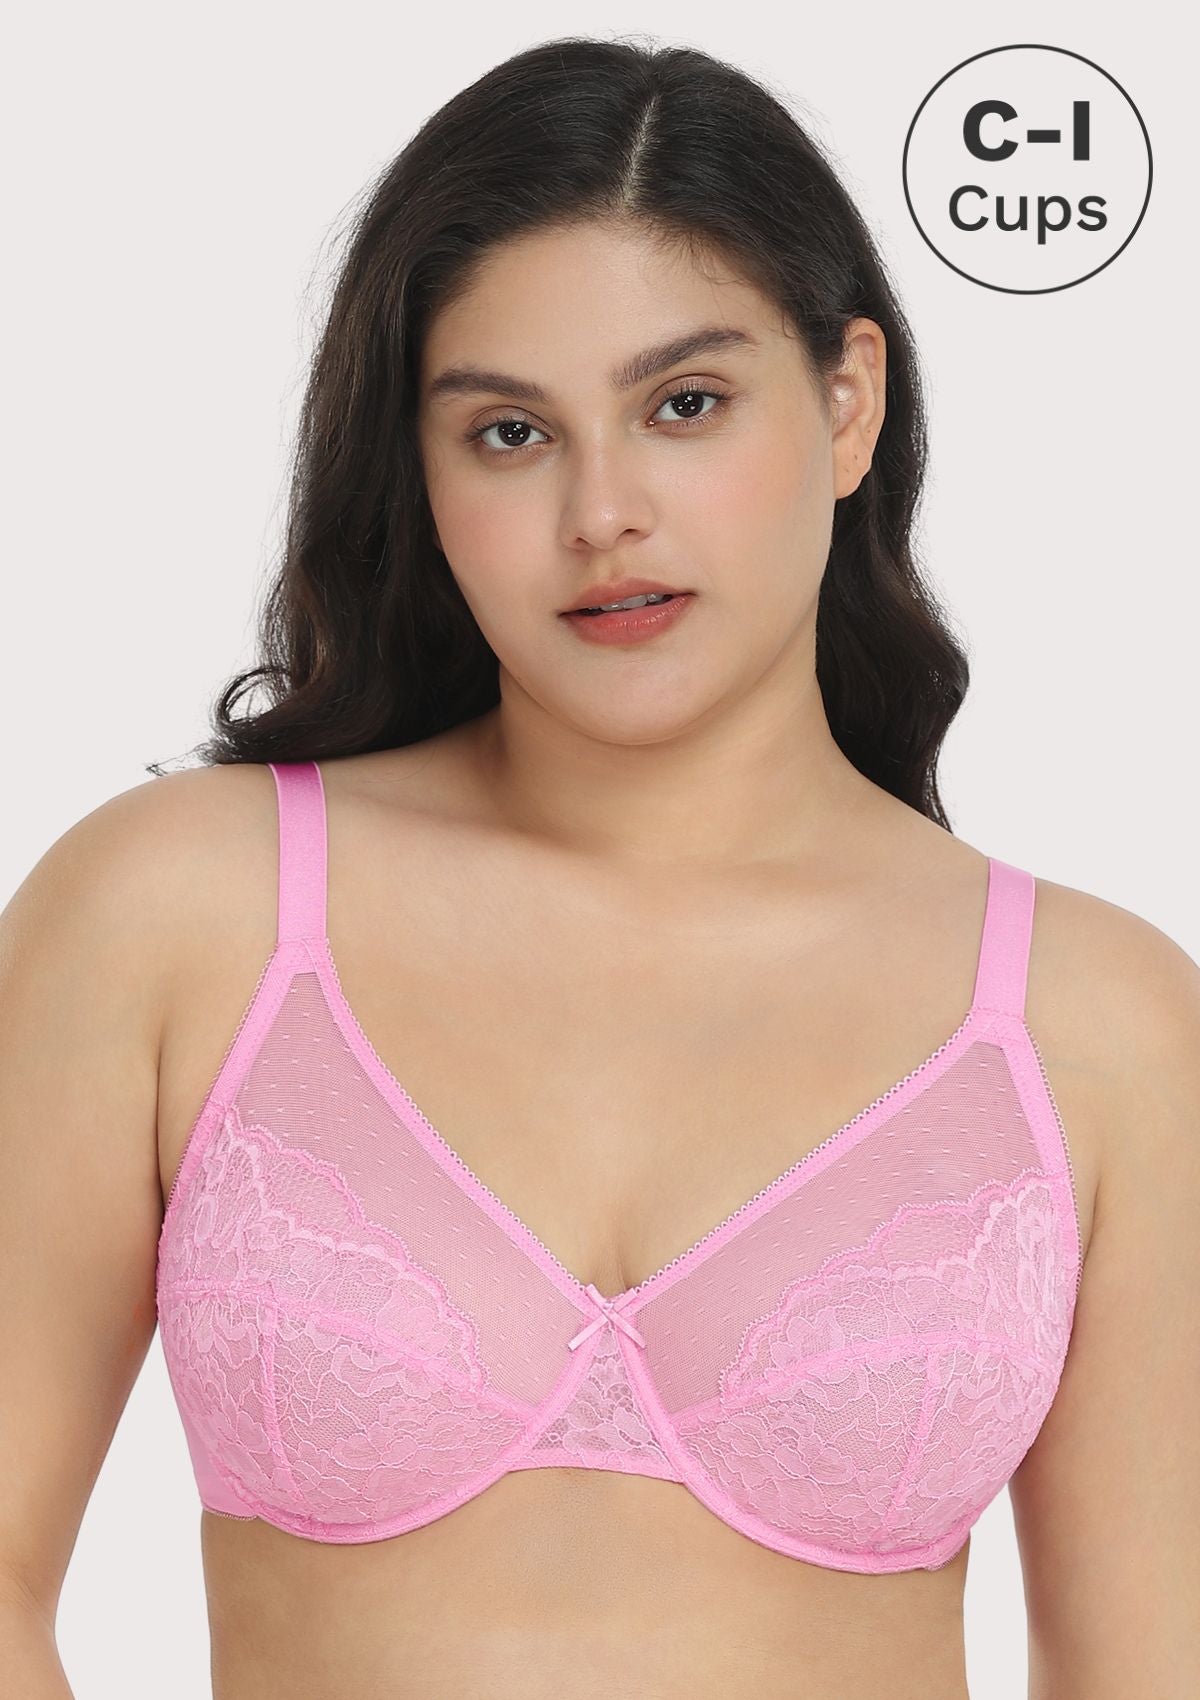 HSIA Enchante Lacy Bra: Comfy Sheer Lace Bra With Lift - Dusty Peach / 34 / H